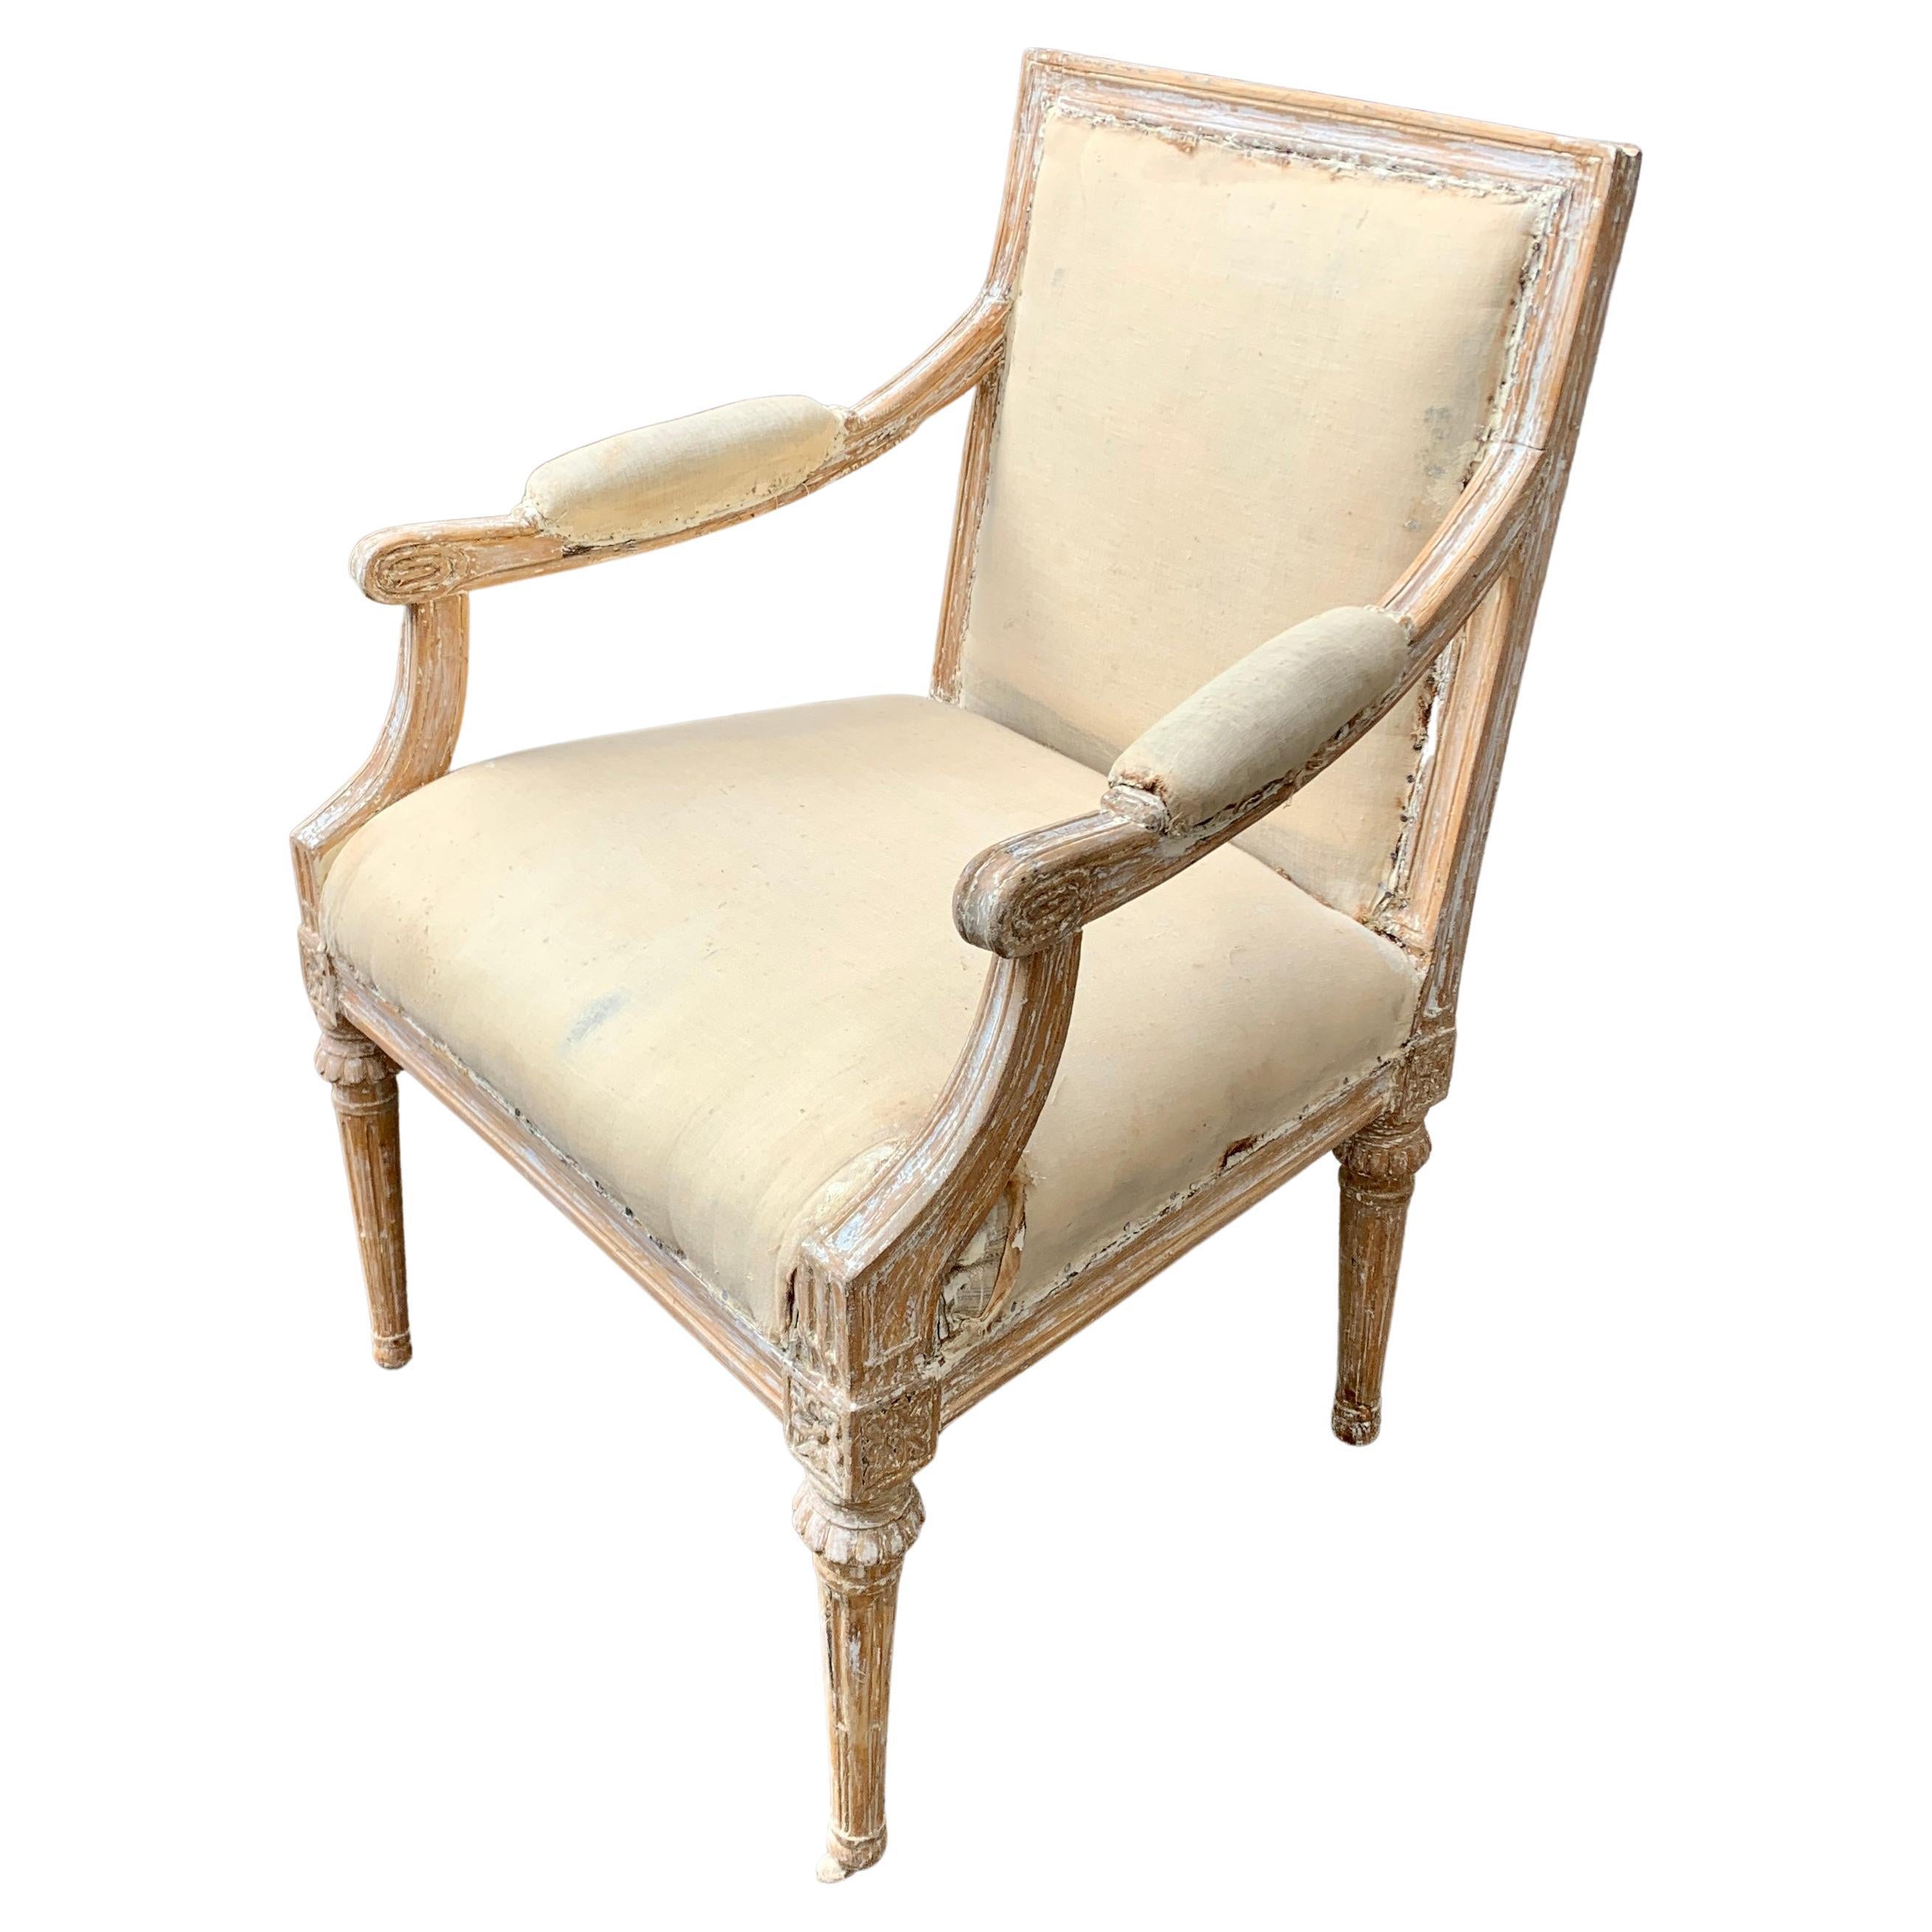 Turn off the 19th Century Swedish armchair with original patina and paint. This Scandinavian settee has been carefully hand-scraped by our restoration team to preserve what was left of the original surface. The quality of the carving and the